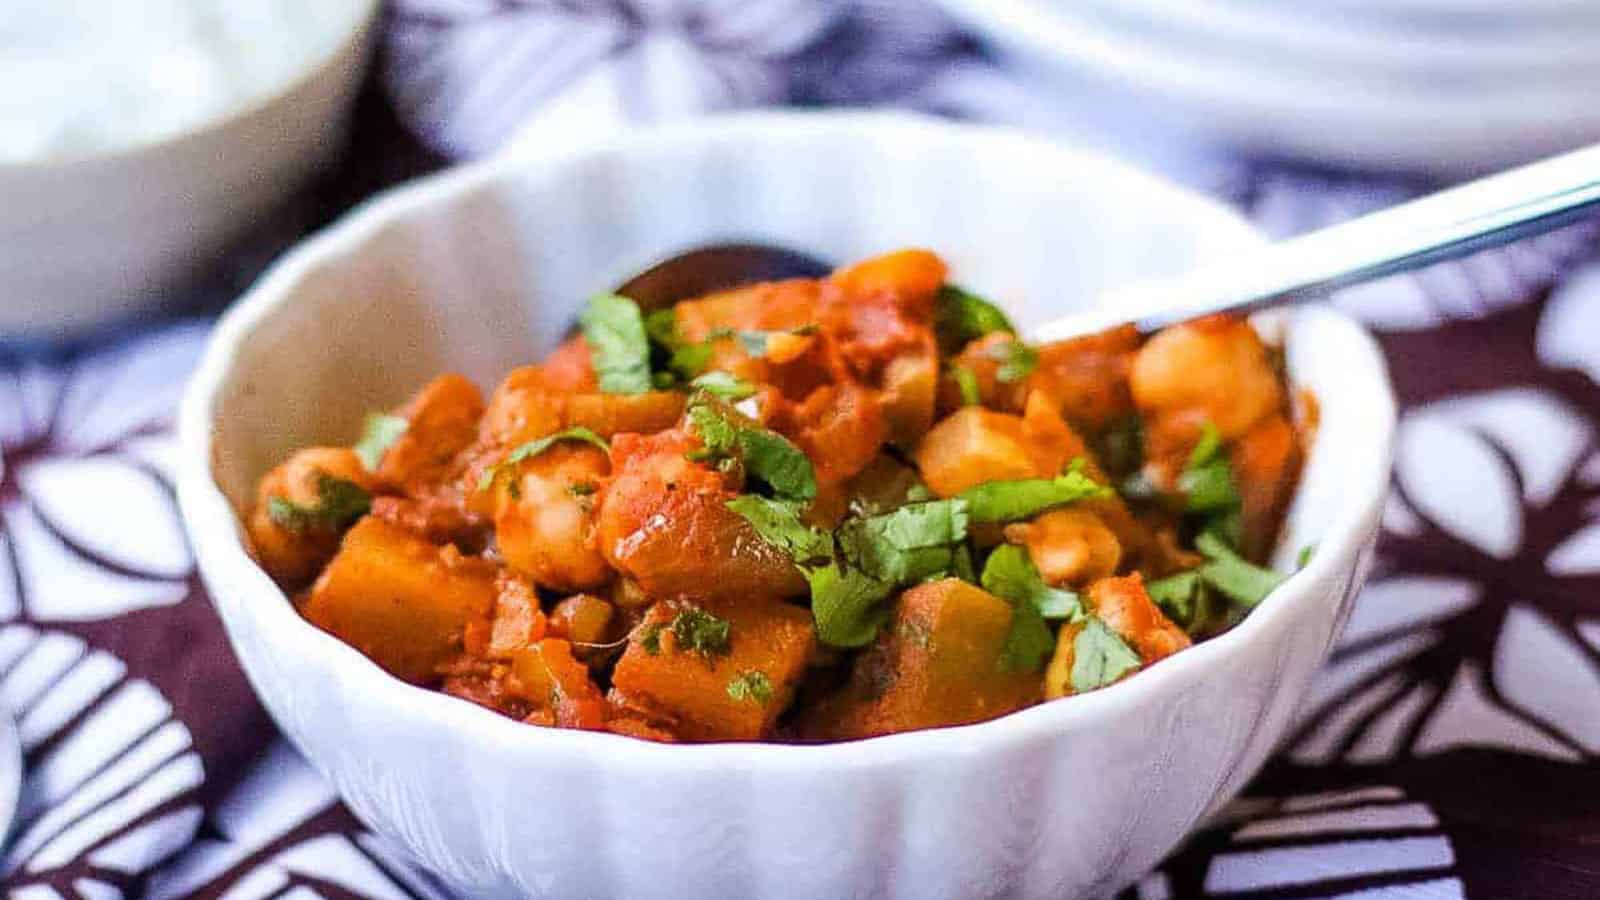 Chana aloo masala in a white bowl with a spoon, on top of a brown and white linen.